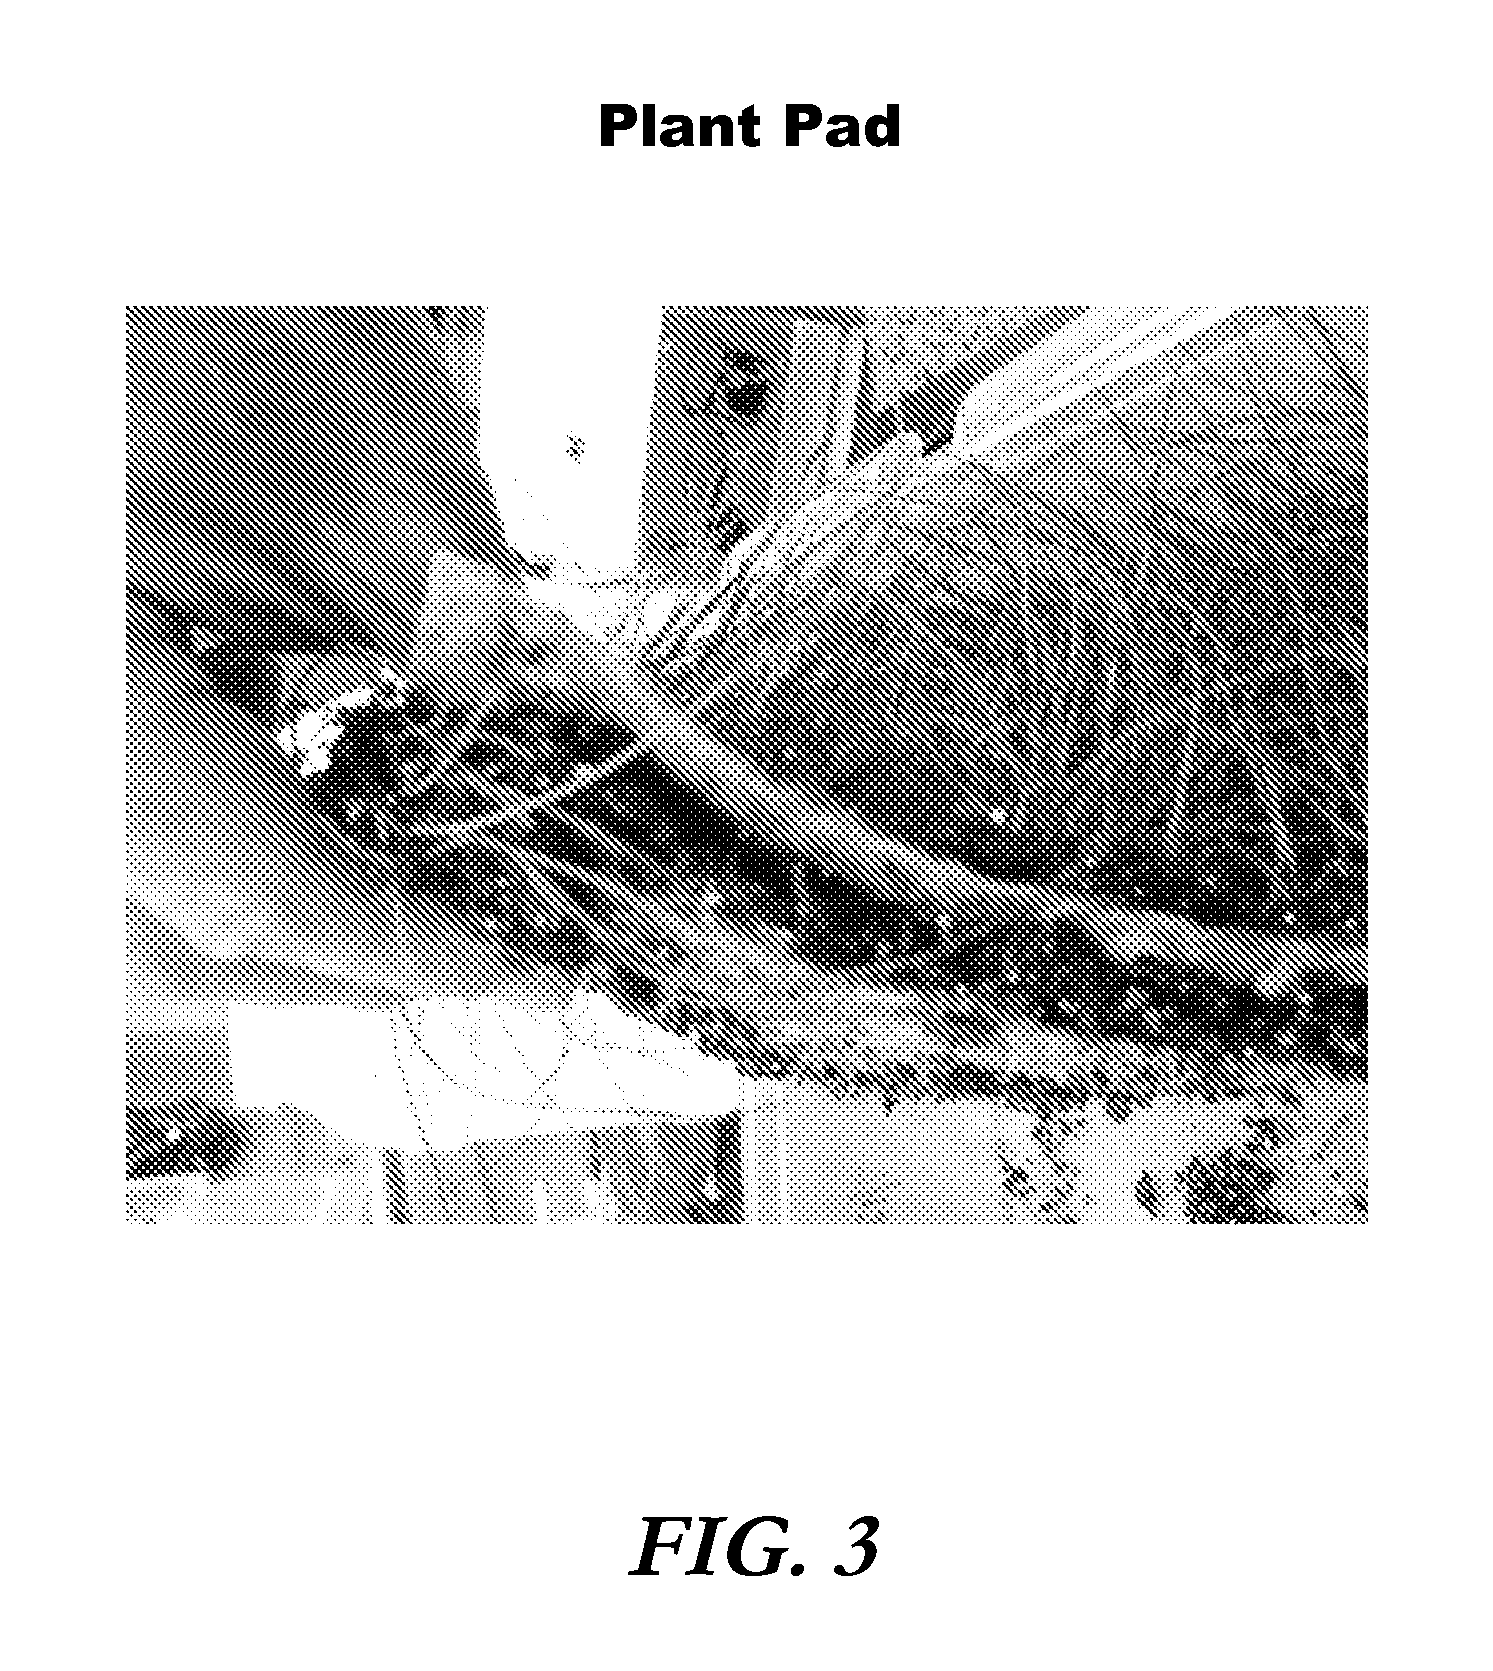 Plant propagation medium and methods of making and using it